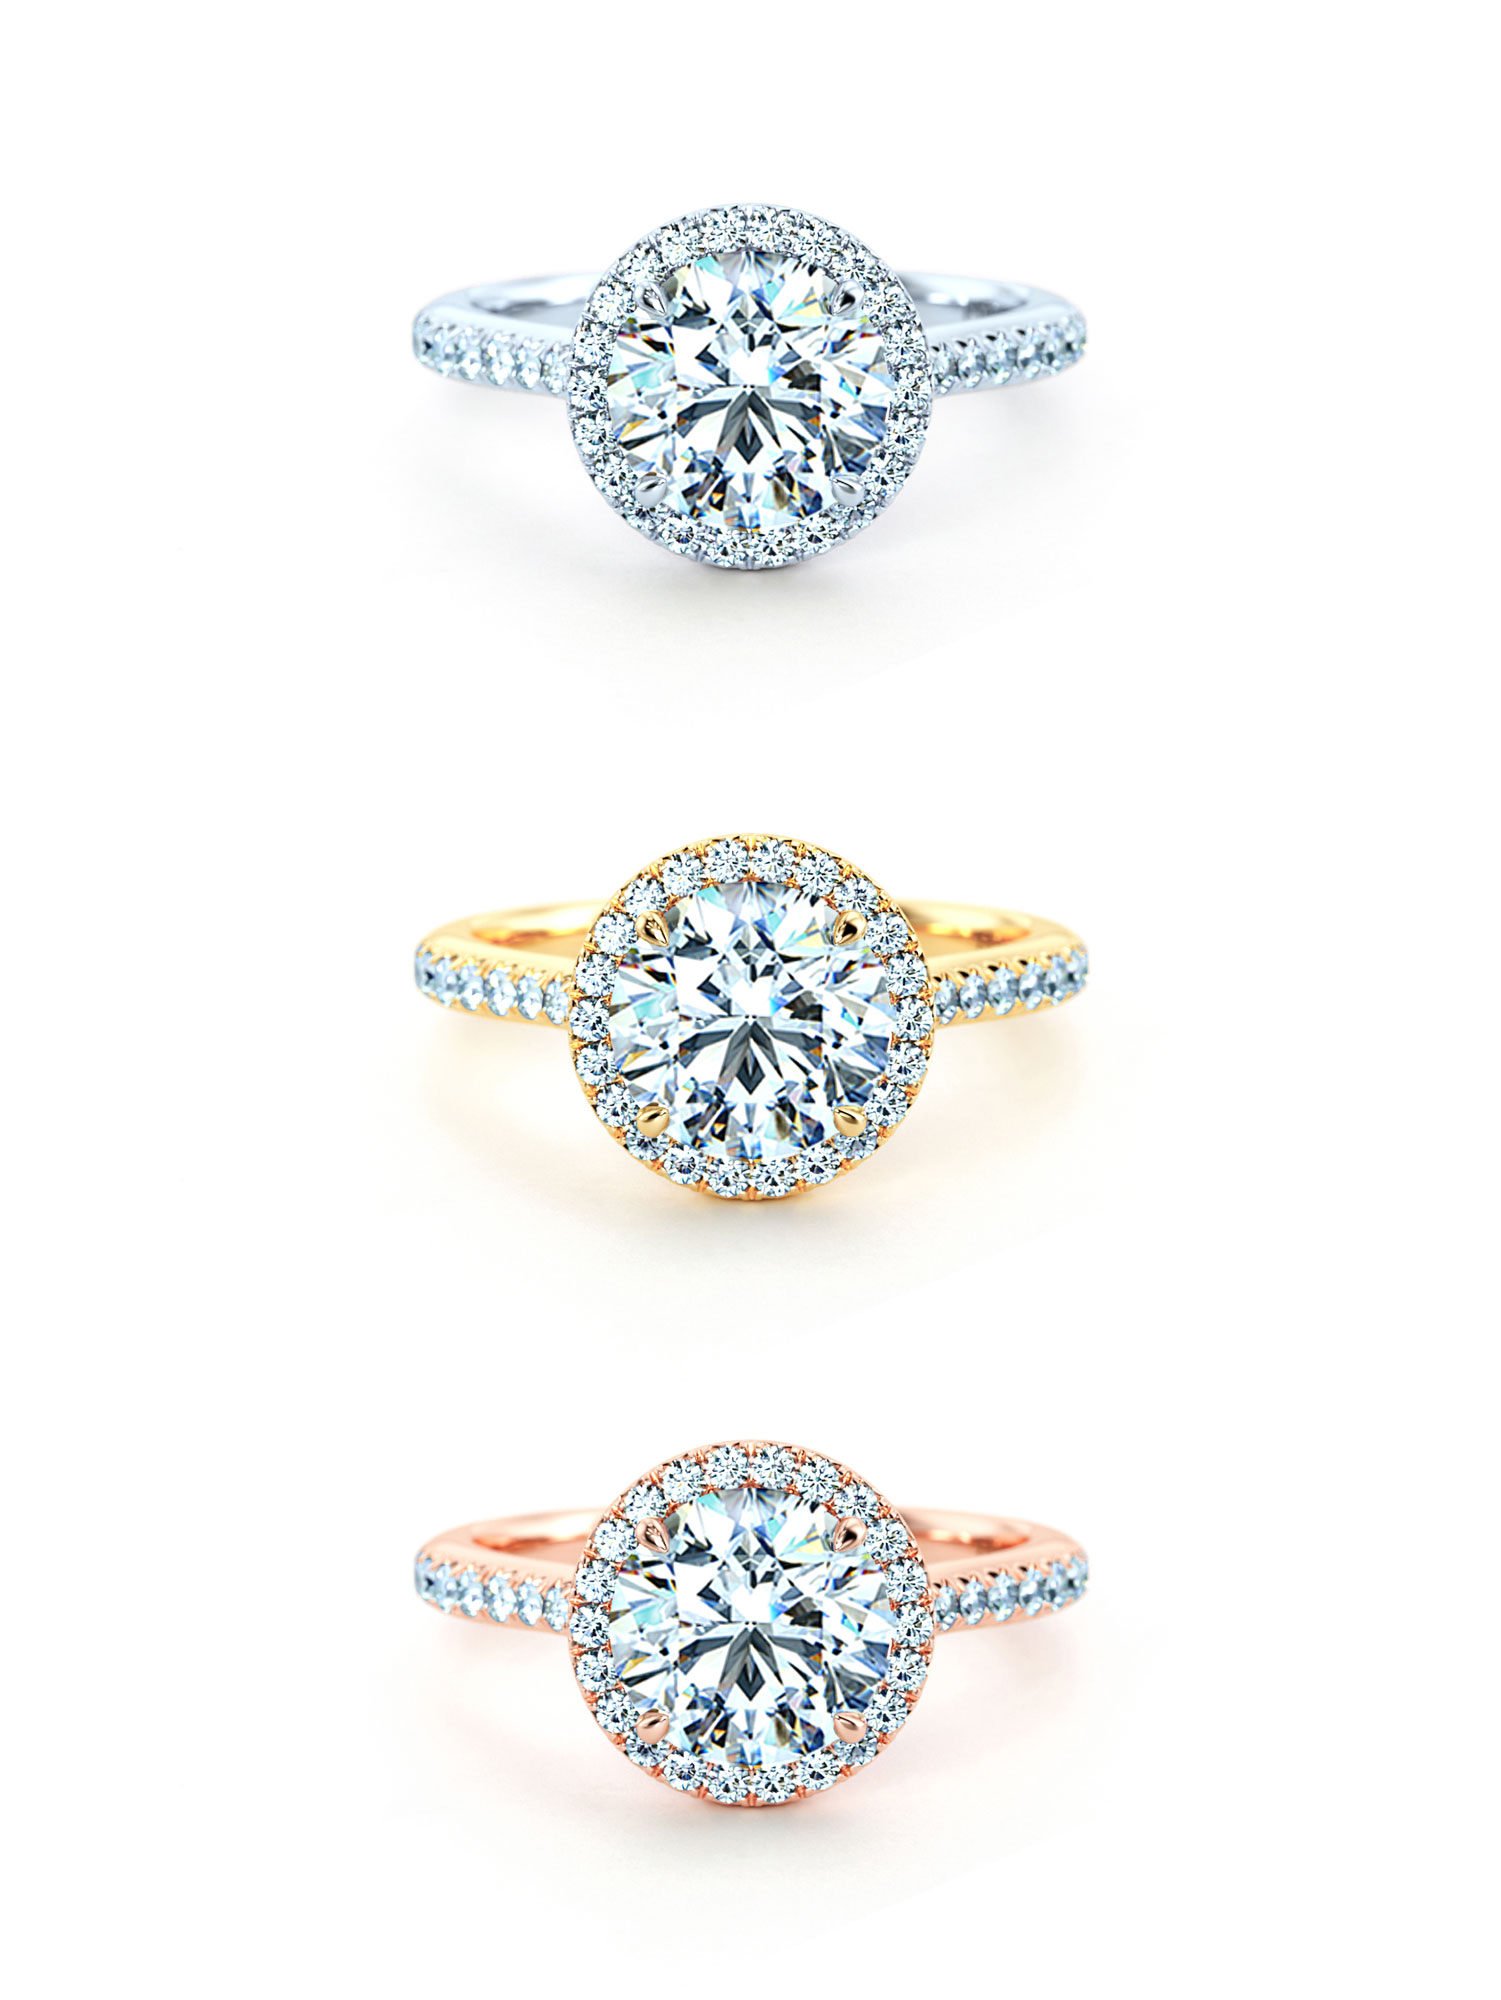 engagement ring materials platinum, white gold, yellow gold, rose gold